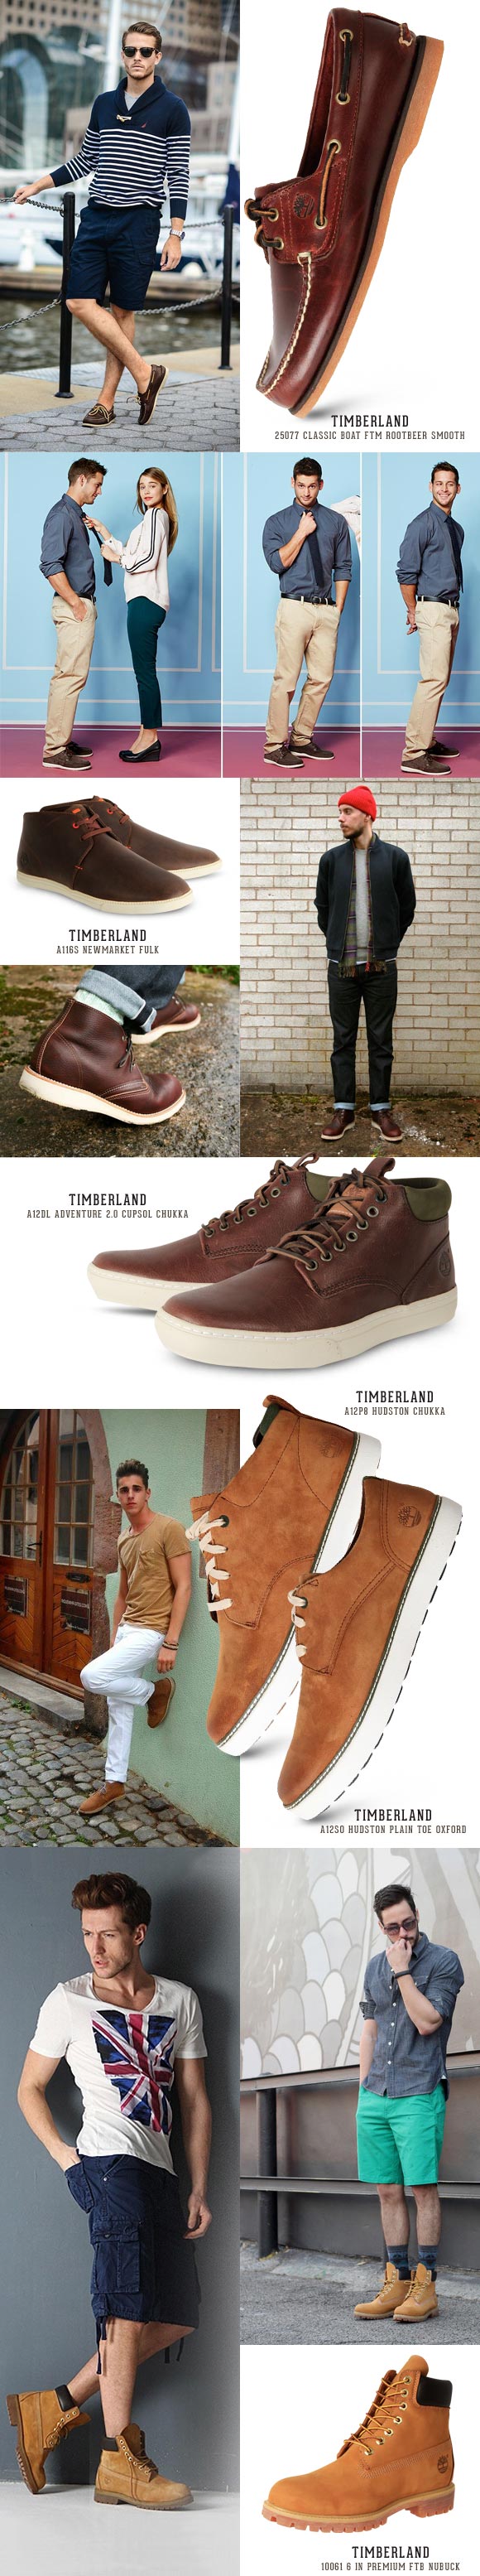 timberland summer shoes